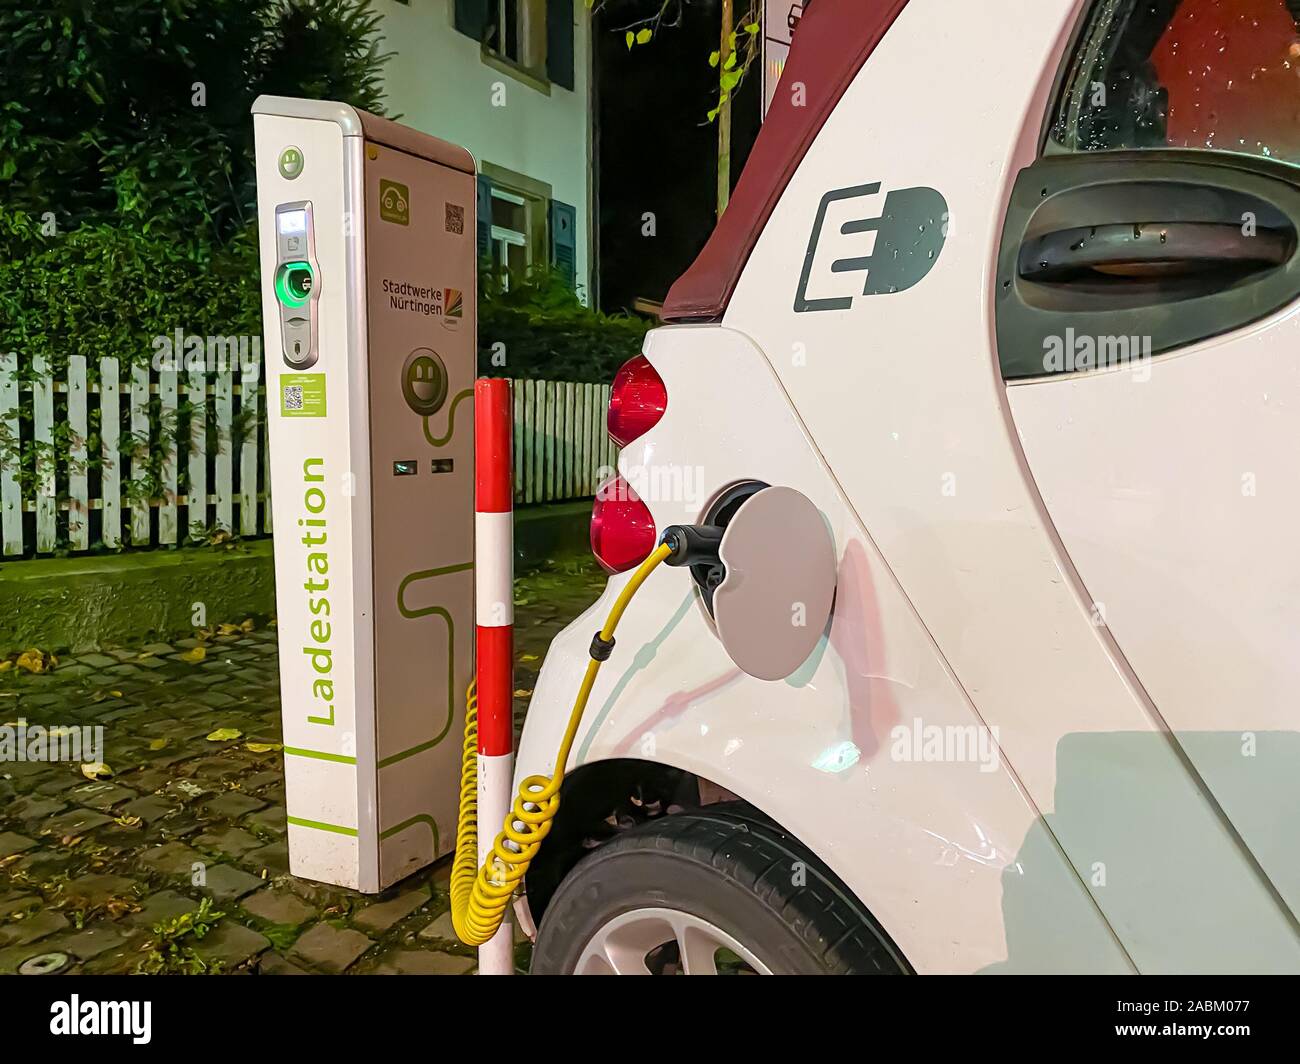 Small electric rent car on a charge base, Nürtingen, Germany Stock Photo